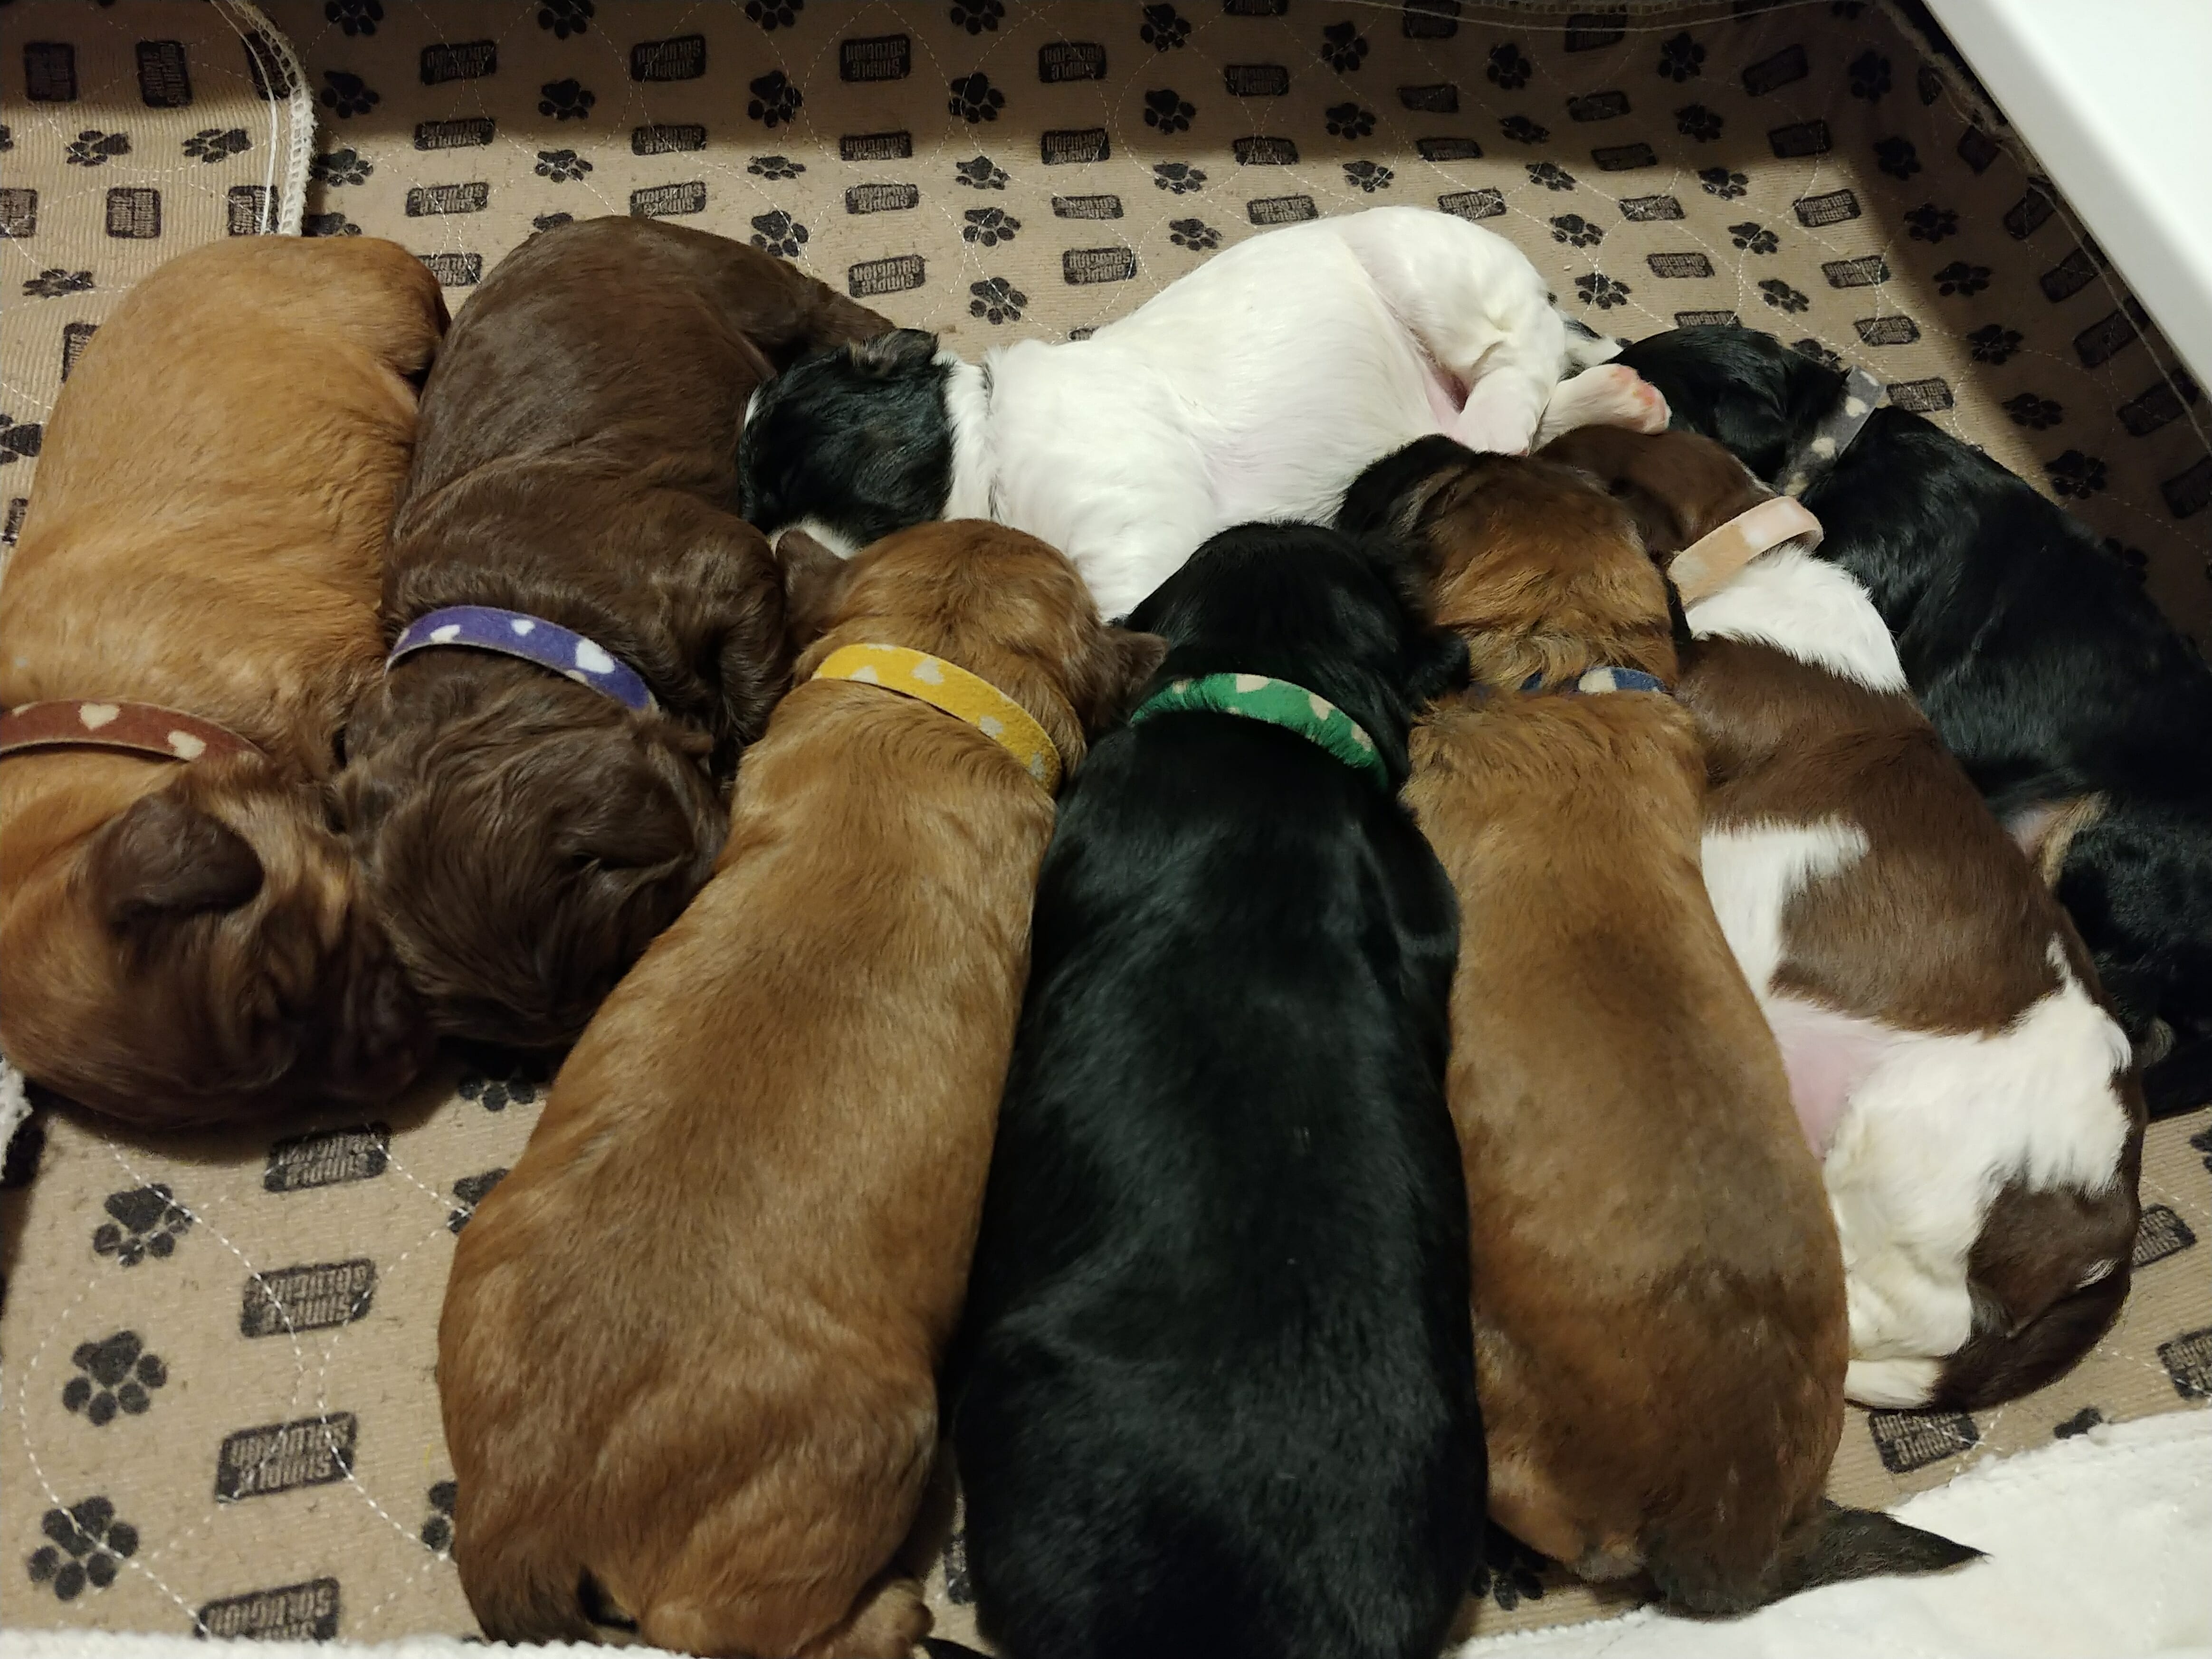 Eight labradoodle puppies sleeping together snuggled up